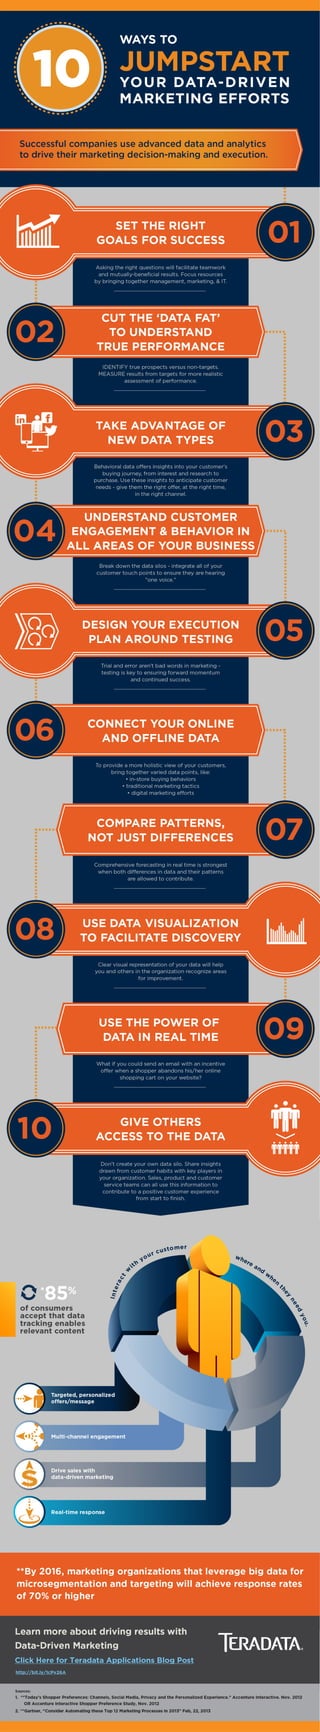 10 Ways to Jumpstart Your Data-Driven Marketing Efforts [Infographic]